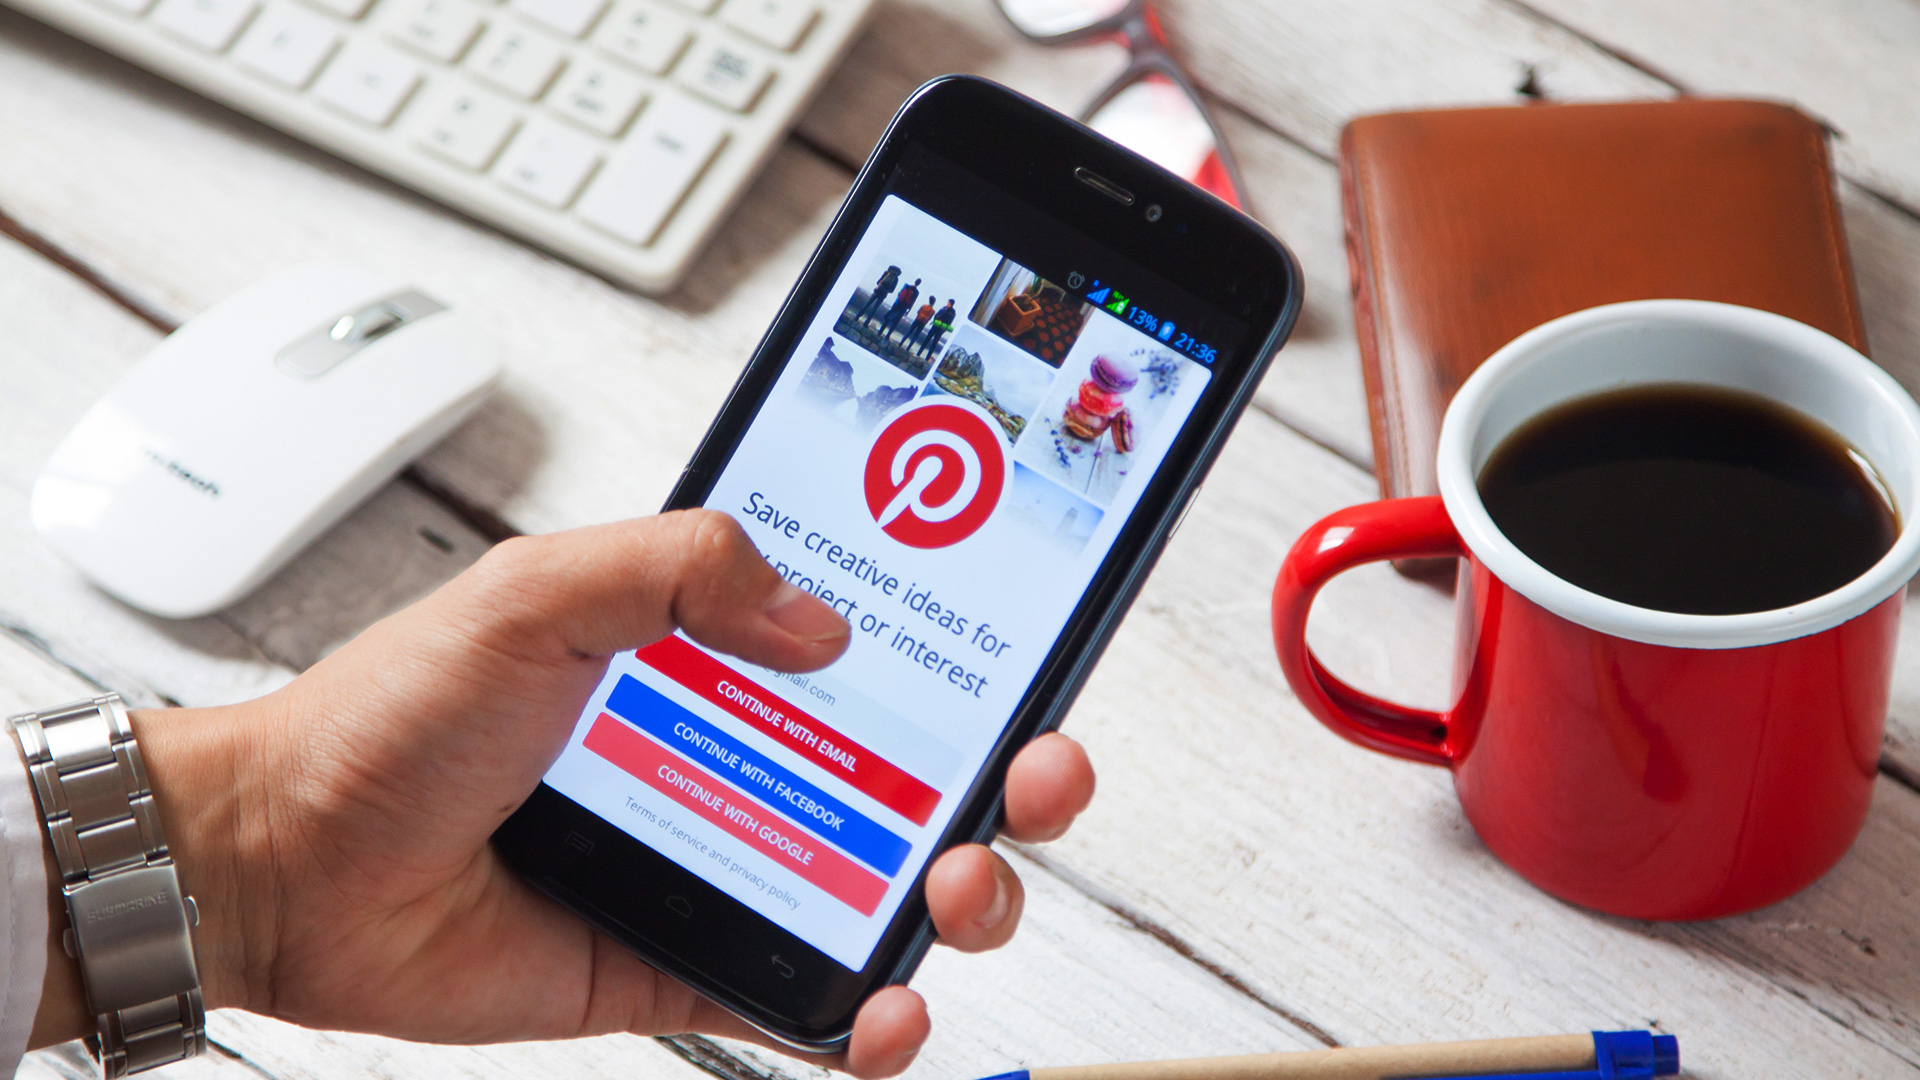 Pinterest's new Mobile Ad Tools let you create, manage campaigns from your phone